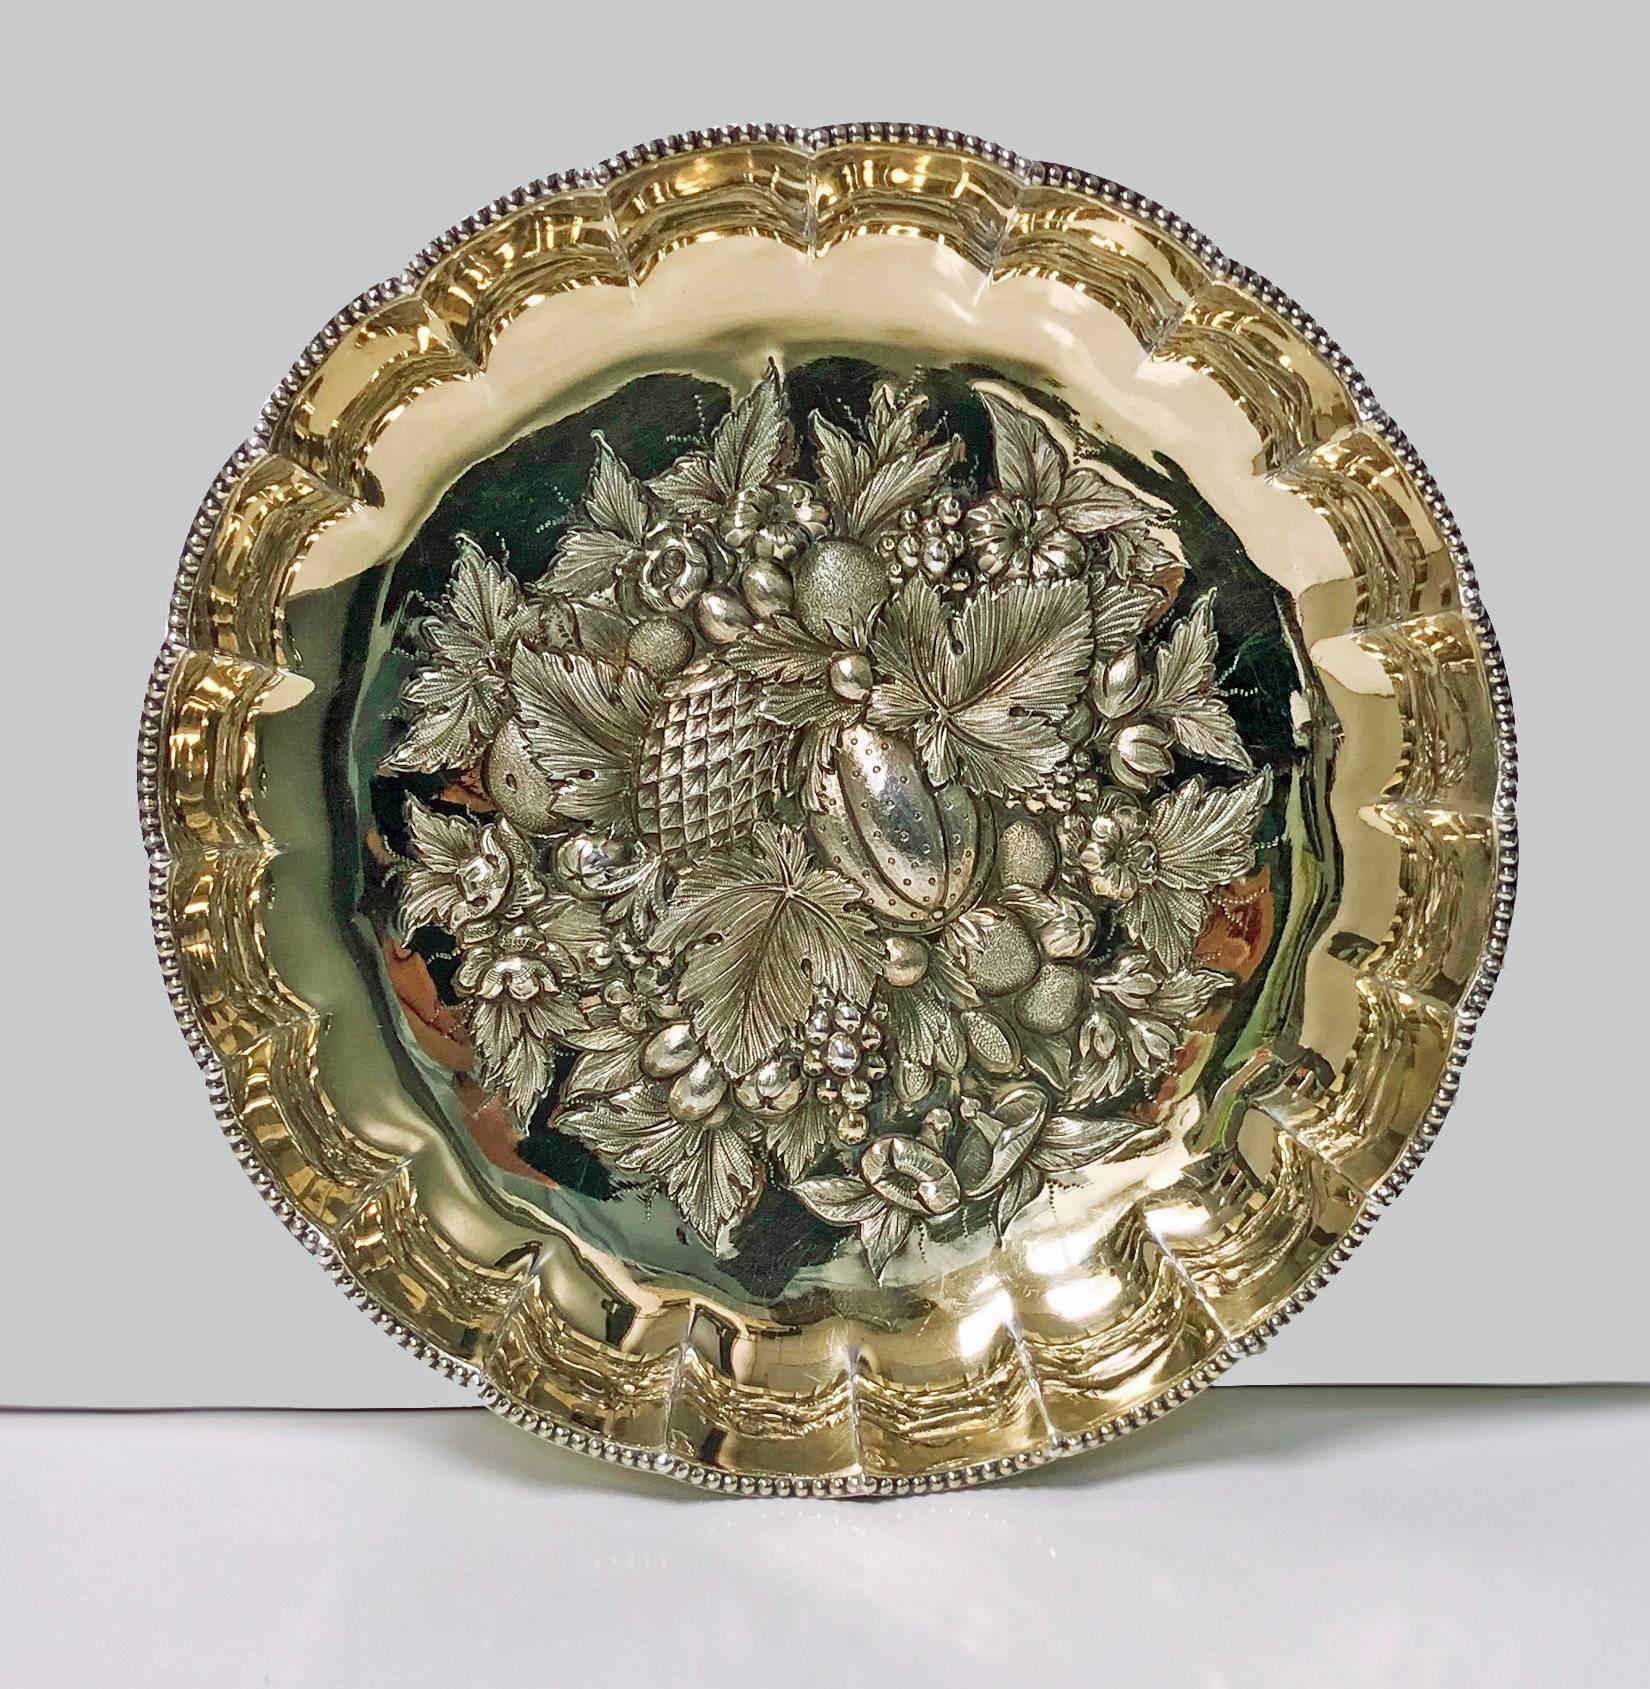 Fine antique English silver gilt fruit bowl, 1911 James Dixon & Sons. The circular bowl on bead border base rising to scalloped lobate surround, the centre with very elaborately embossed repousee fruits and foliage decoration. Original gilding.